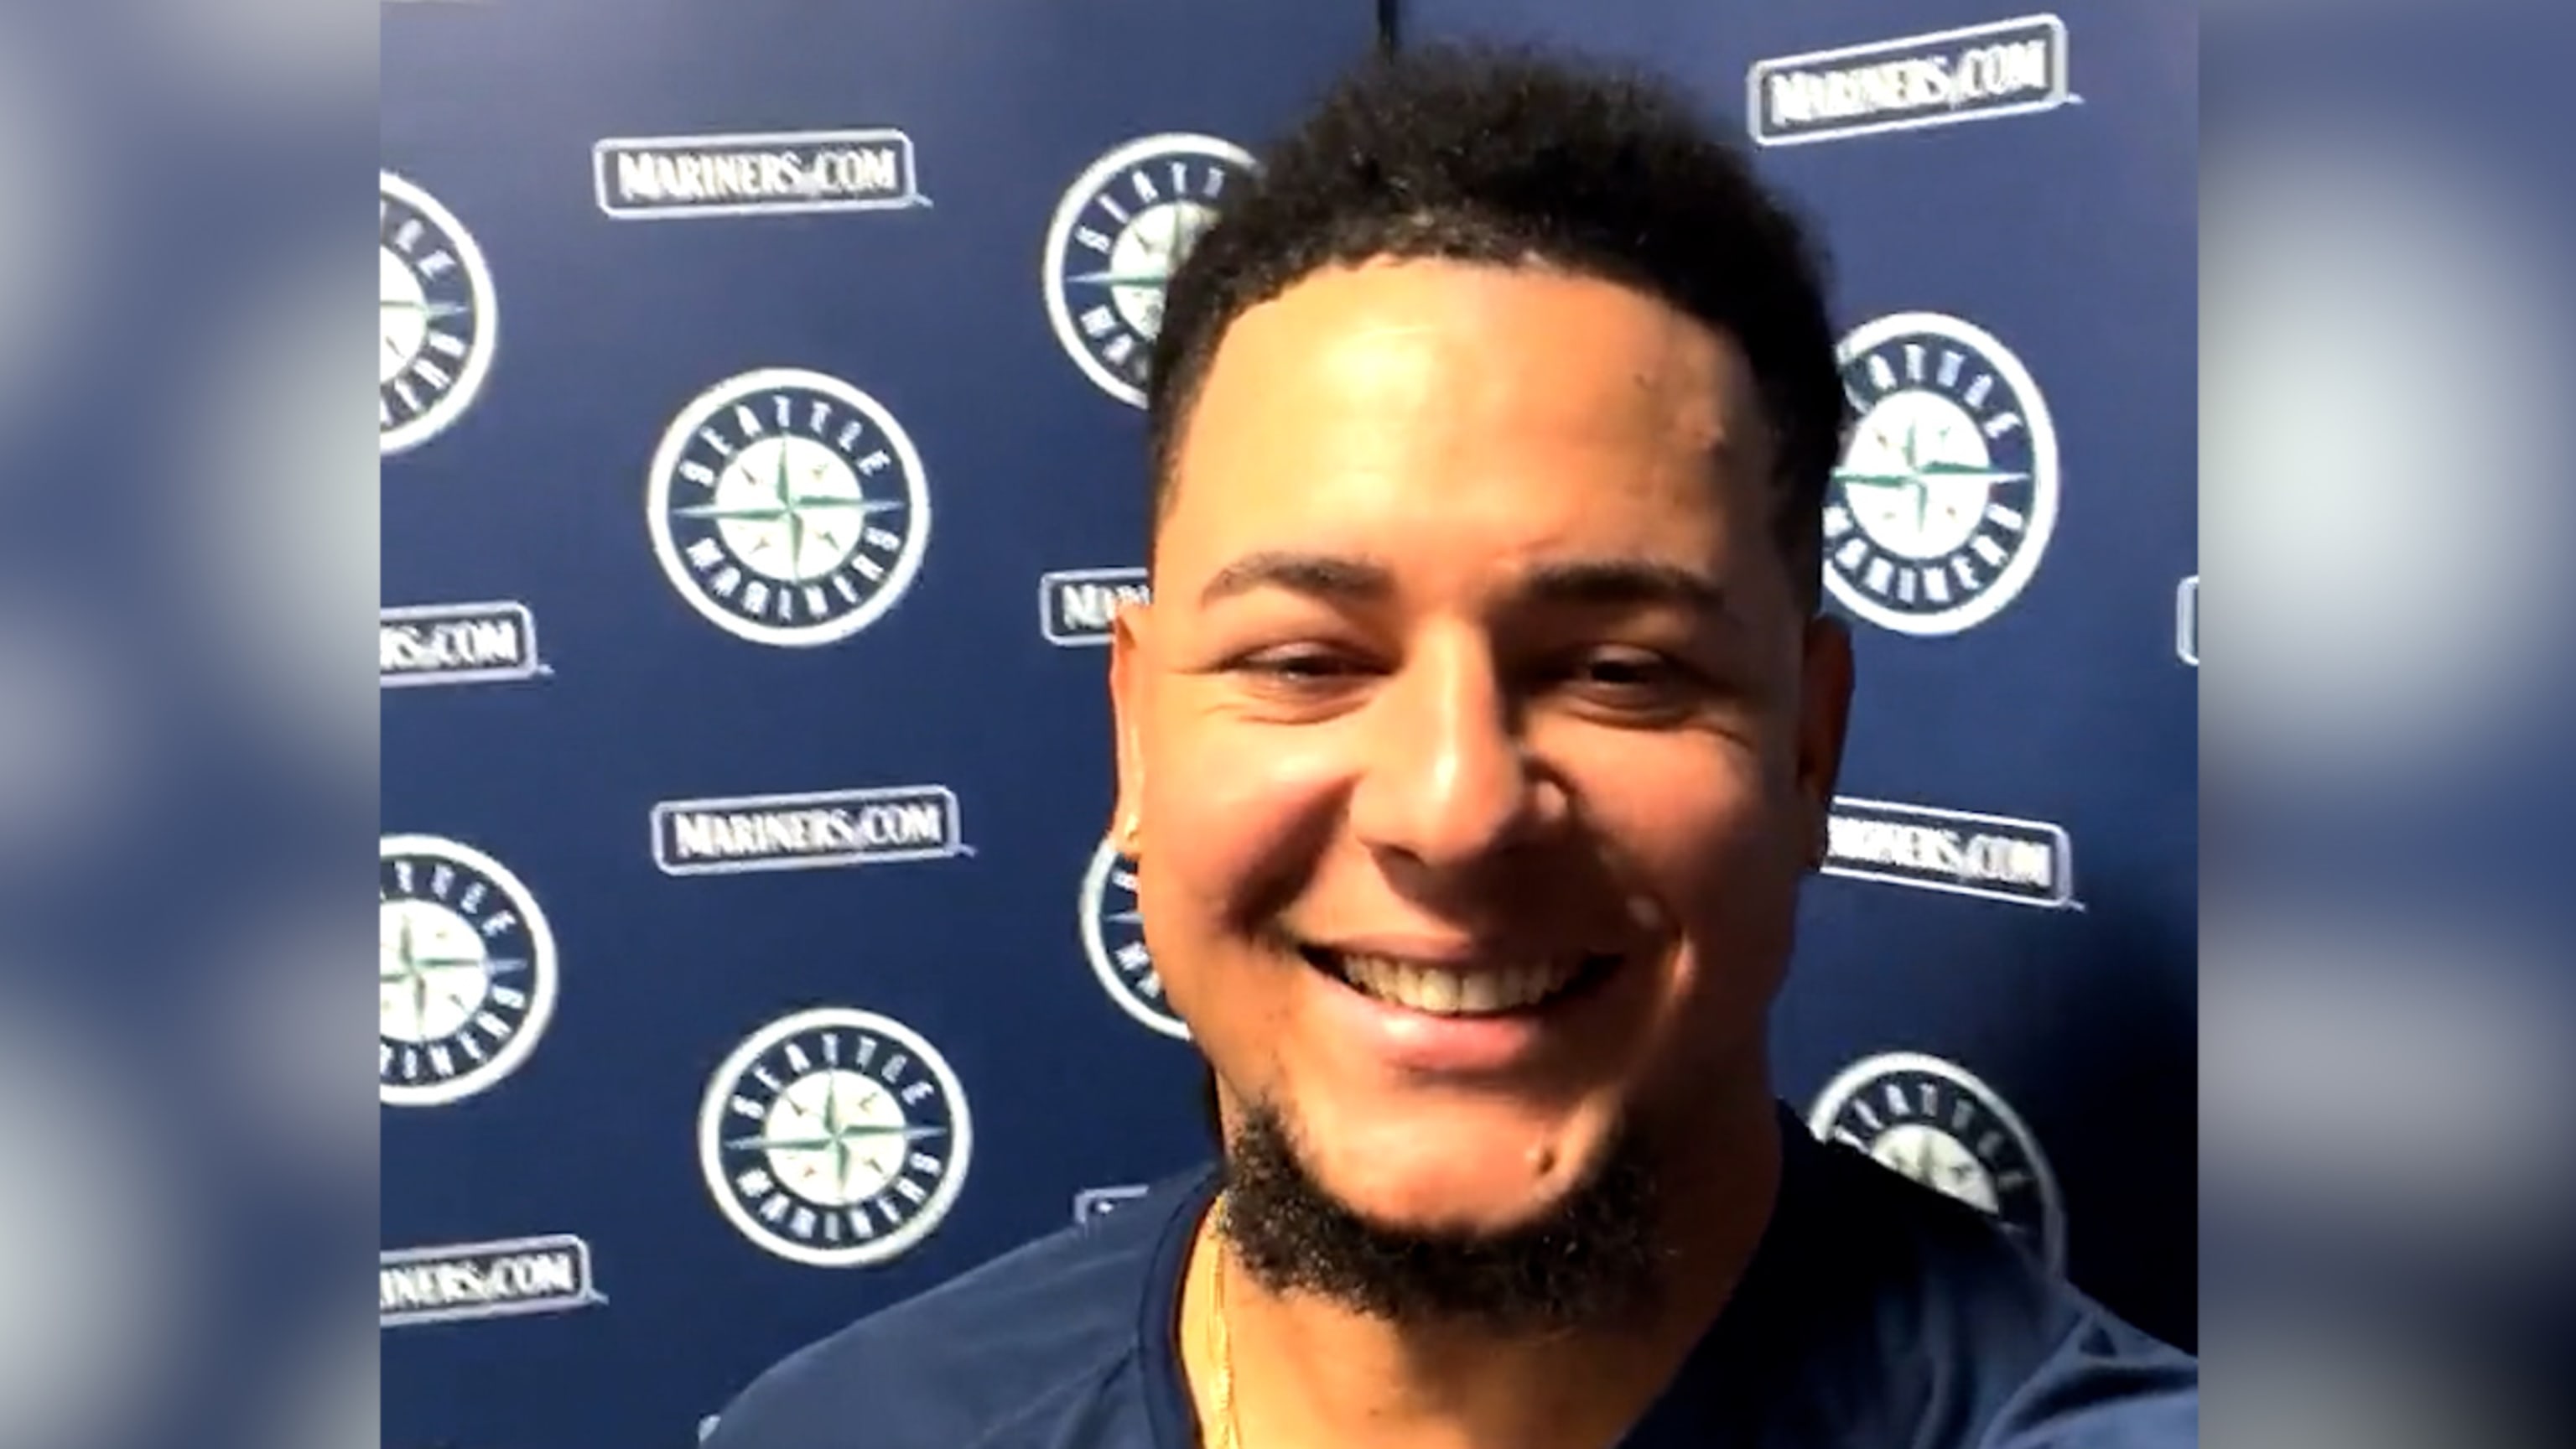 Luis Castillo discusses contract extension with Mariners